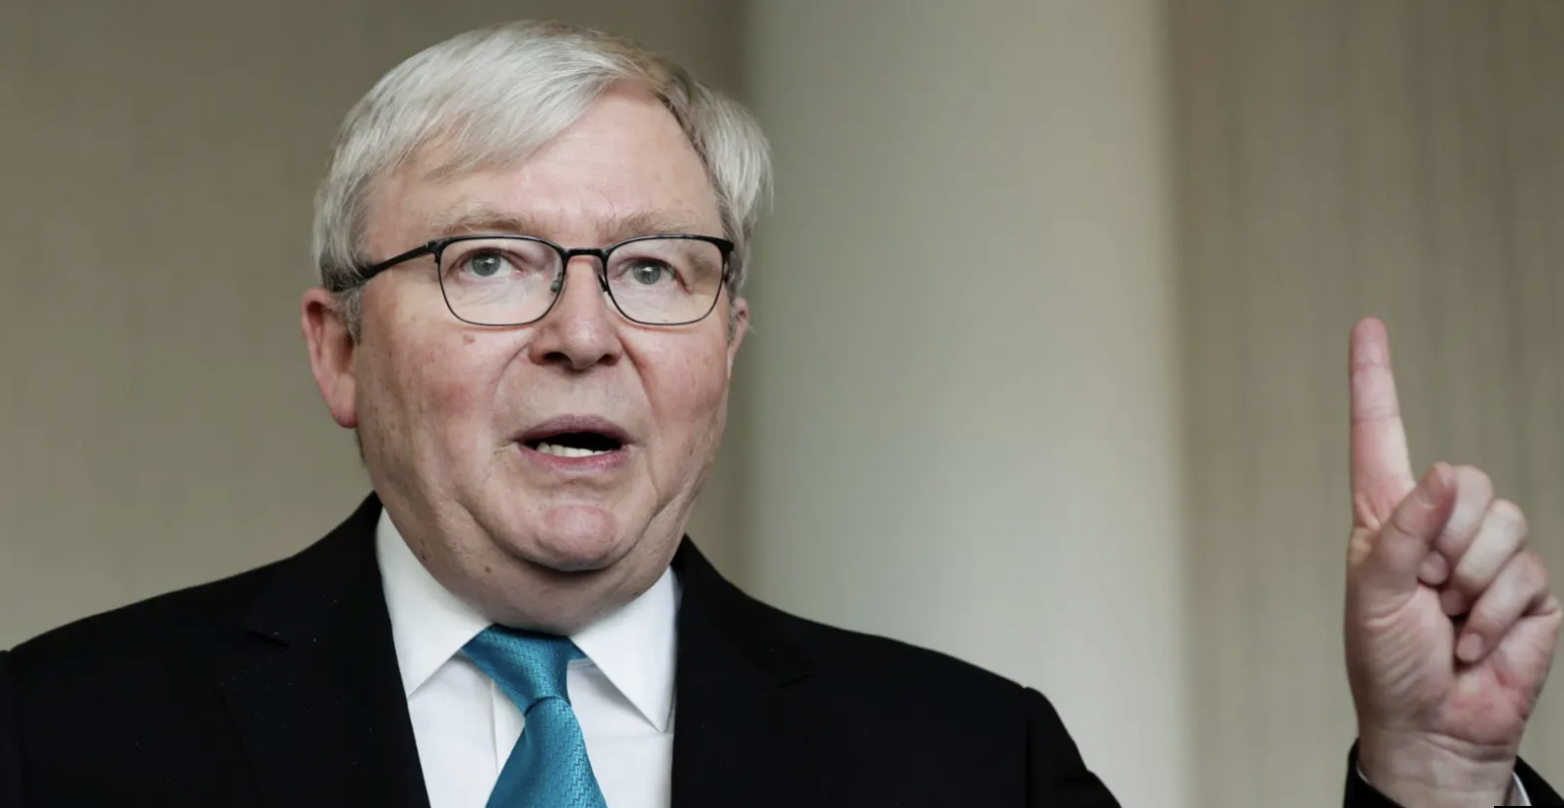 Australia at ‘real risk’ of recession, and a hot war with Iran, warns Kevin Rudd